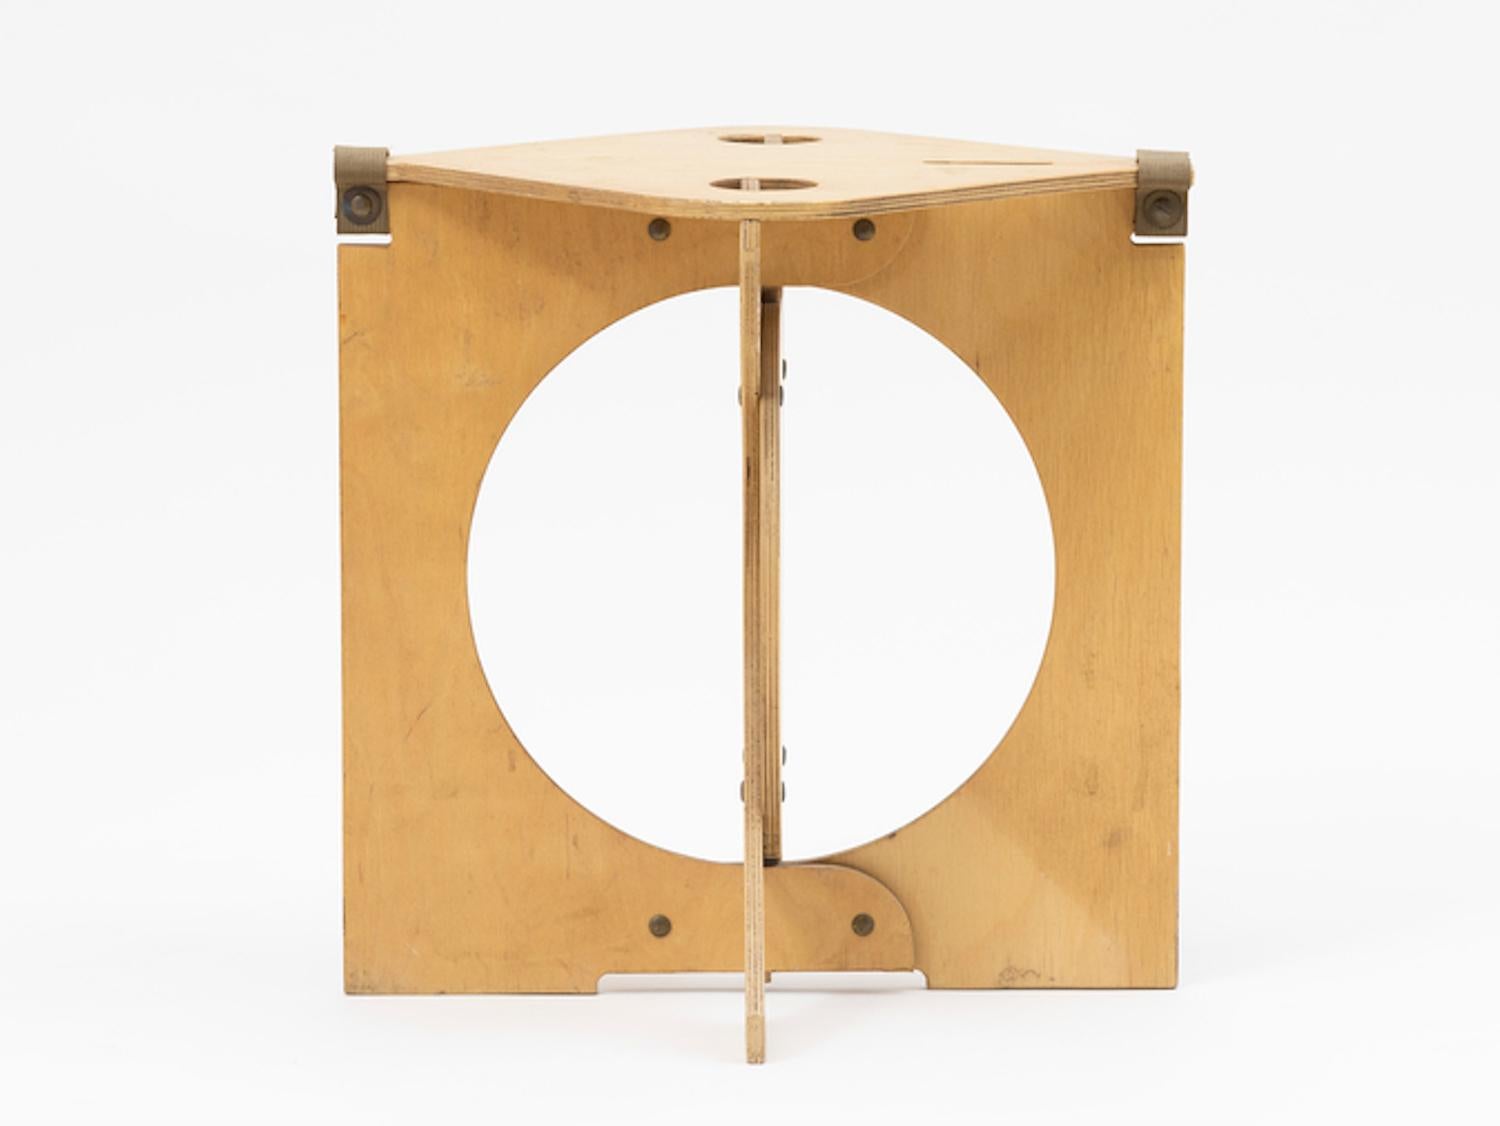 Plywood and canvas folding stool by Barry Simpson, manufactured by Dirt Road in Waitsfield, Vermont between 1976-1984. Marked on underside of seat: Rooster by Dirt Road / Waitsfield, VT. This design is in the permanent collection of the Brooklyn